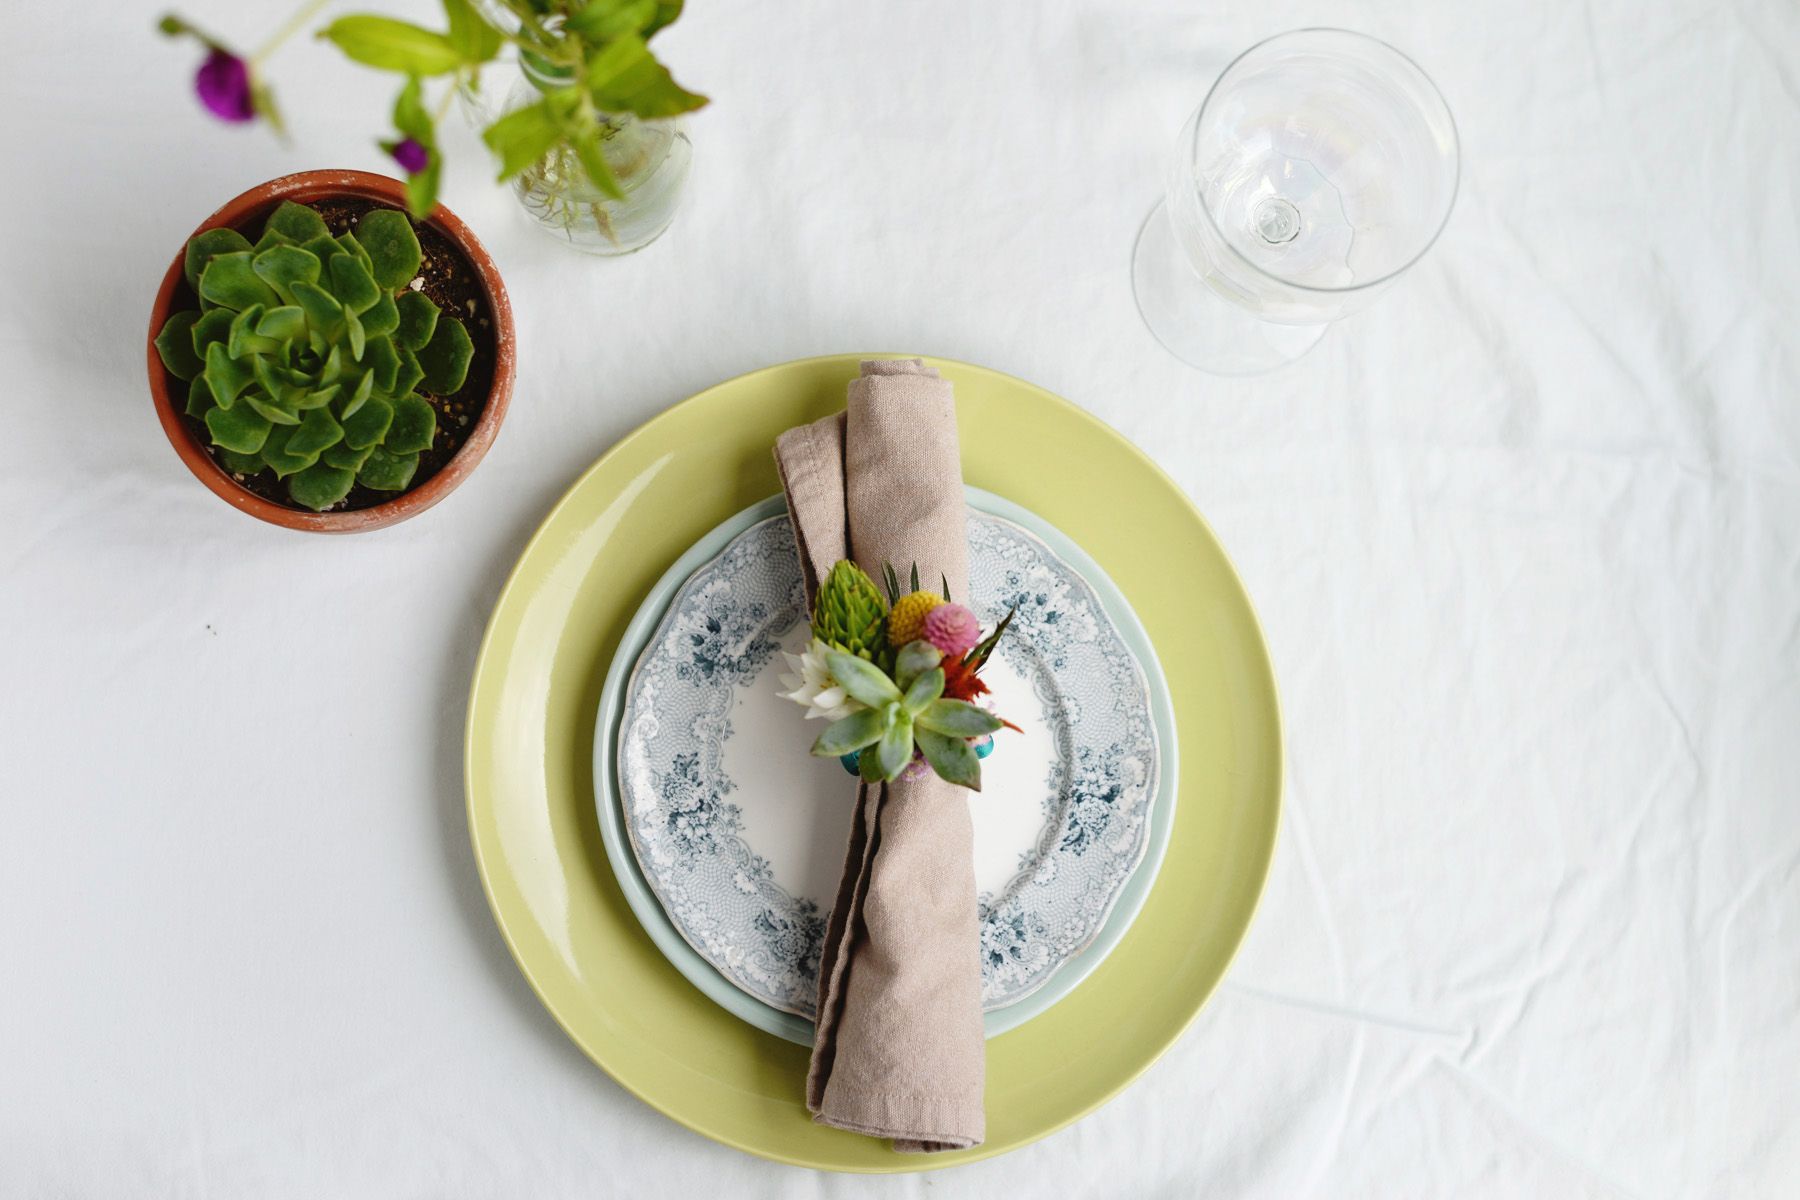 DIY Floral Napkin Rings on Plate